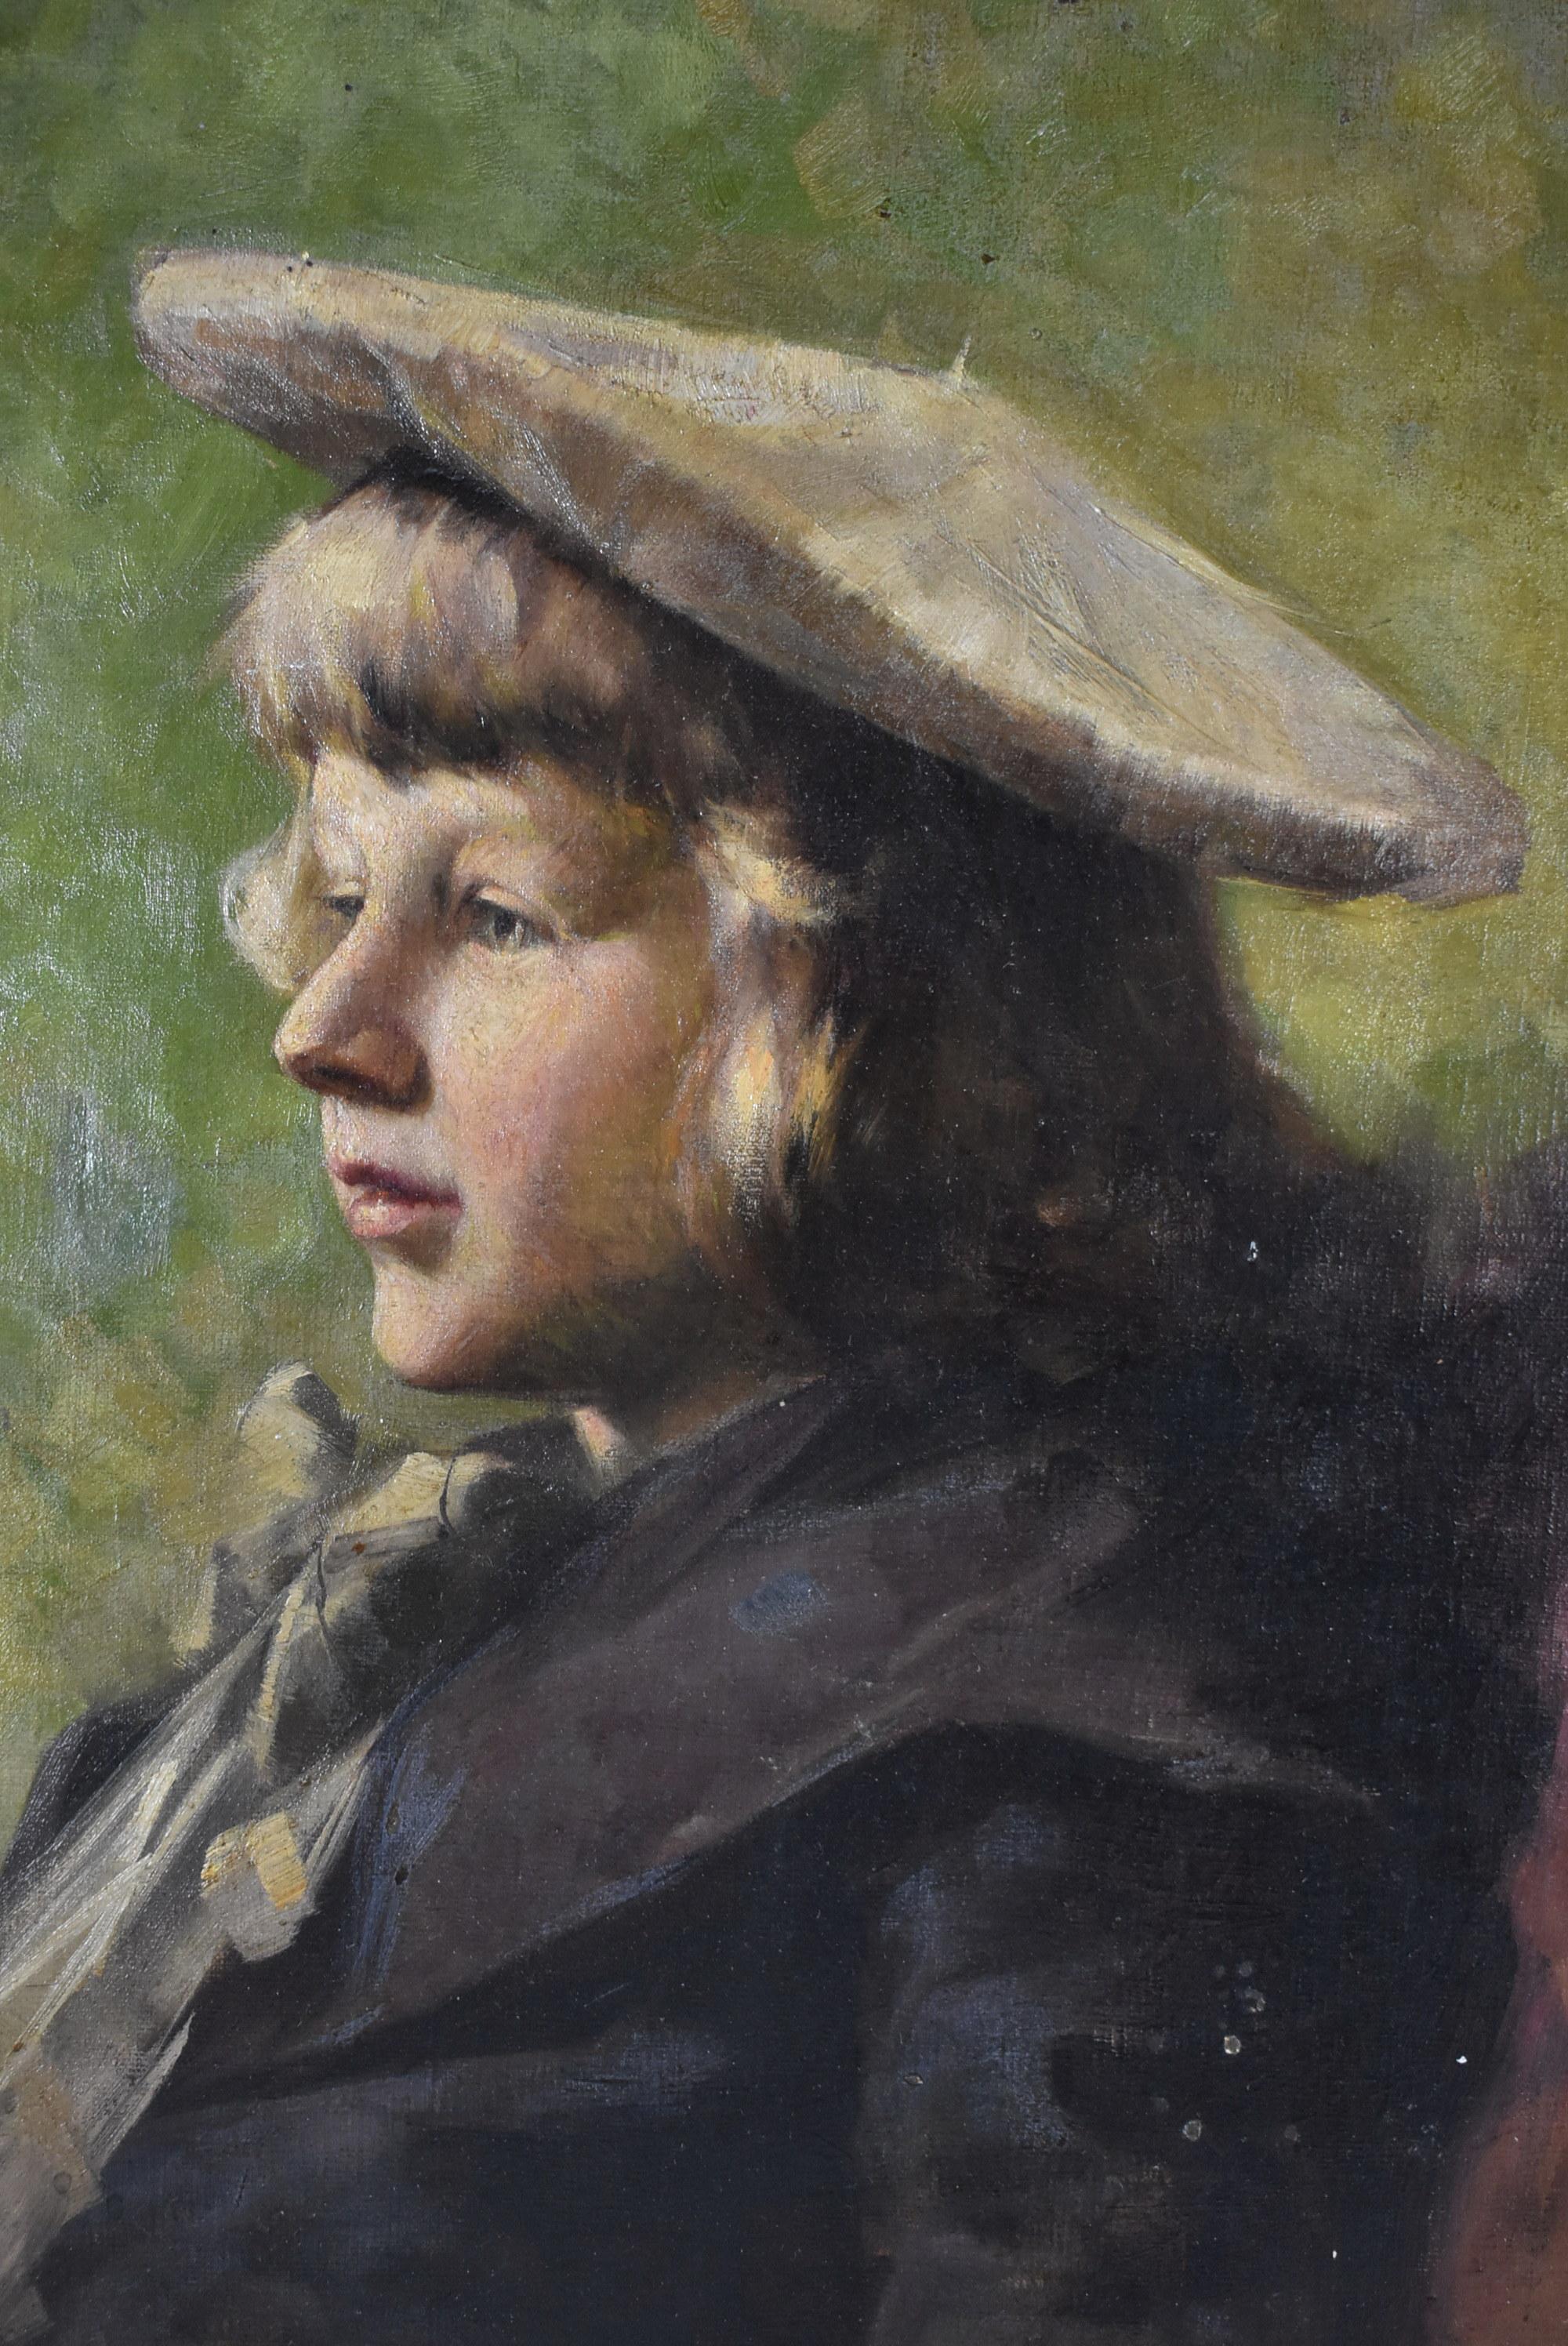 Oil on canvas of a young man by Ukrainian artist Iwan Tusz 1869-1941. Has had a small repair. Frame has some damage. Image size measures 15.57